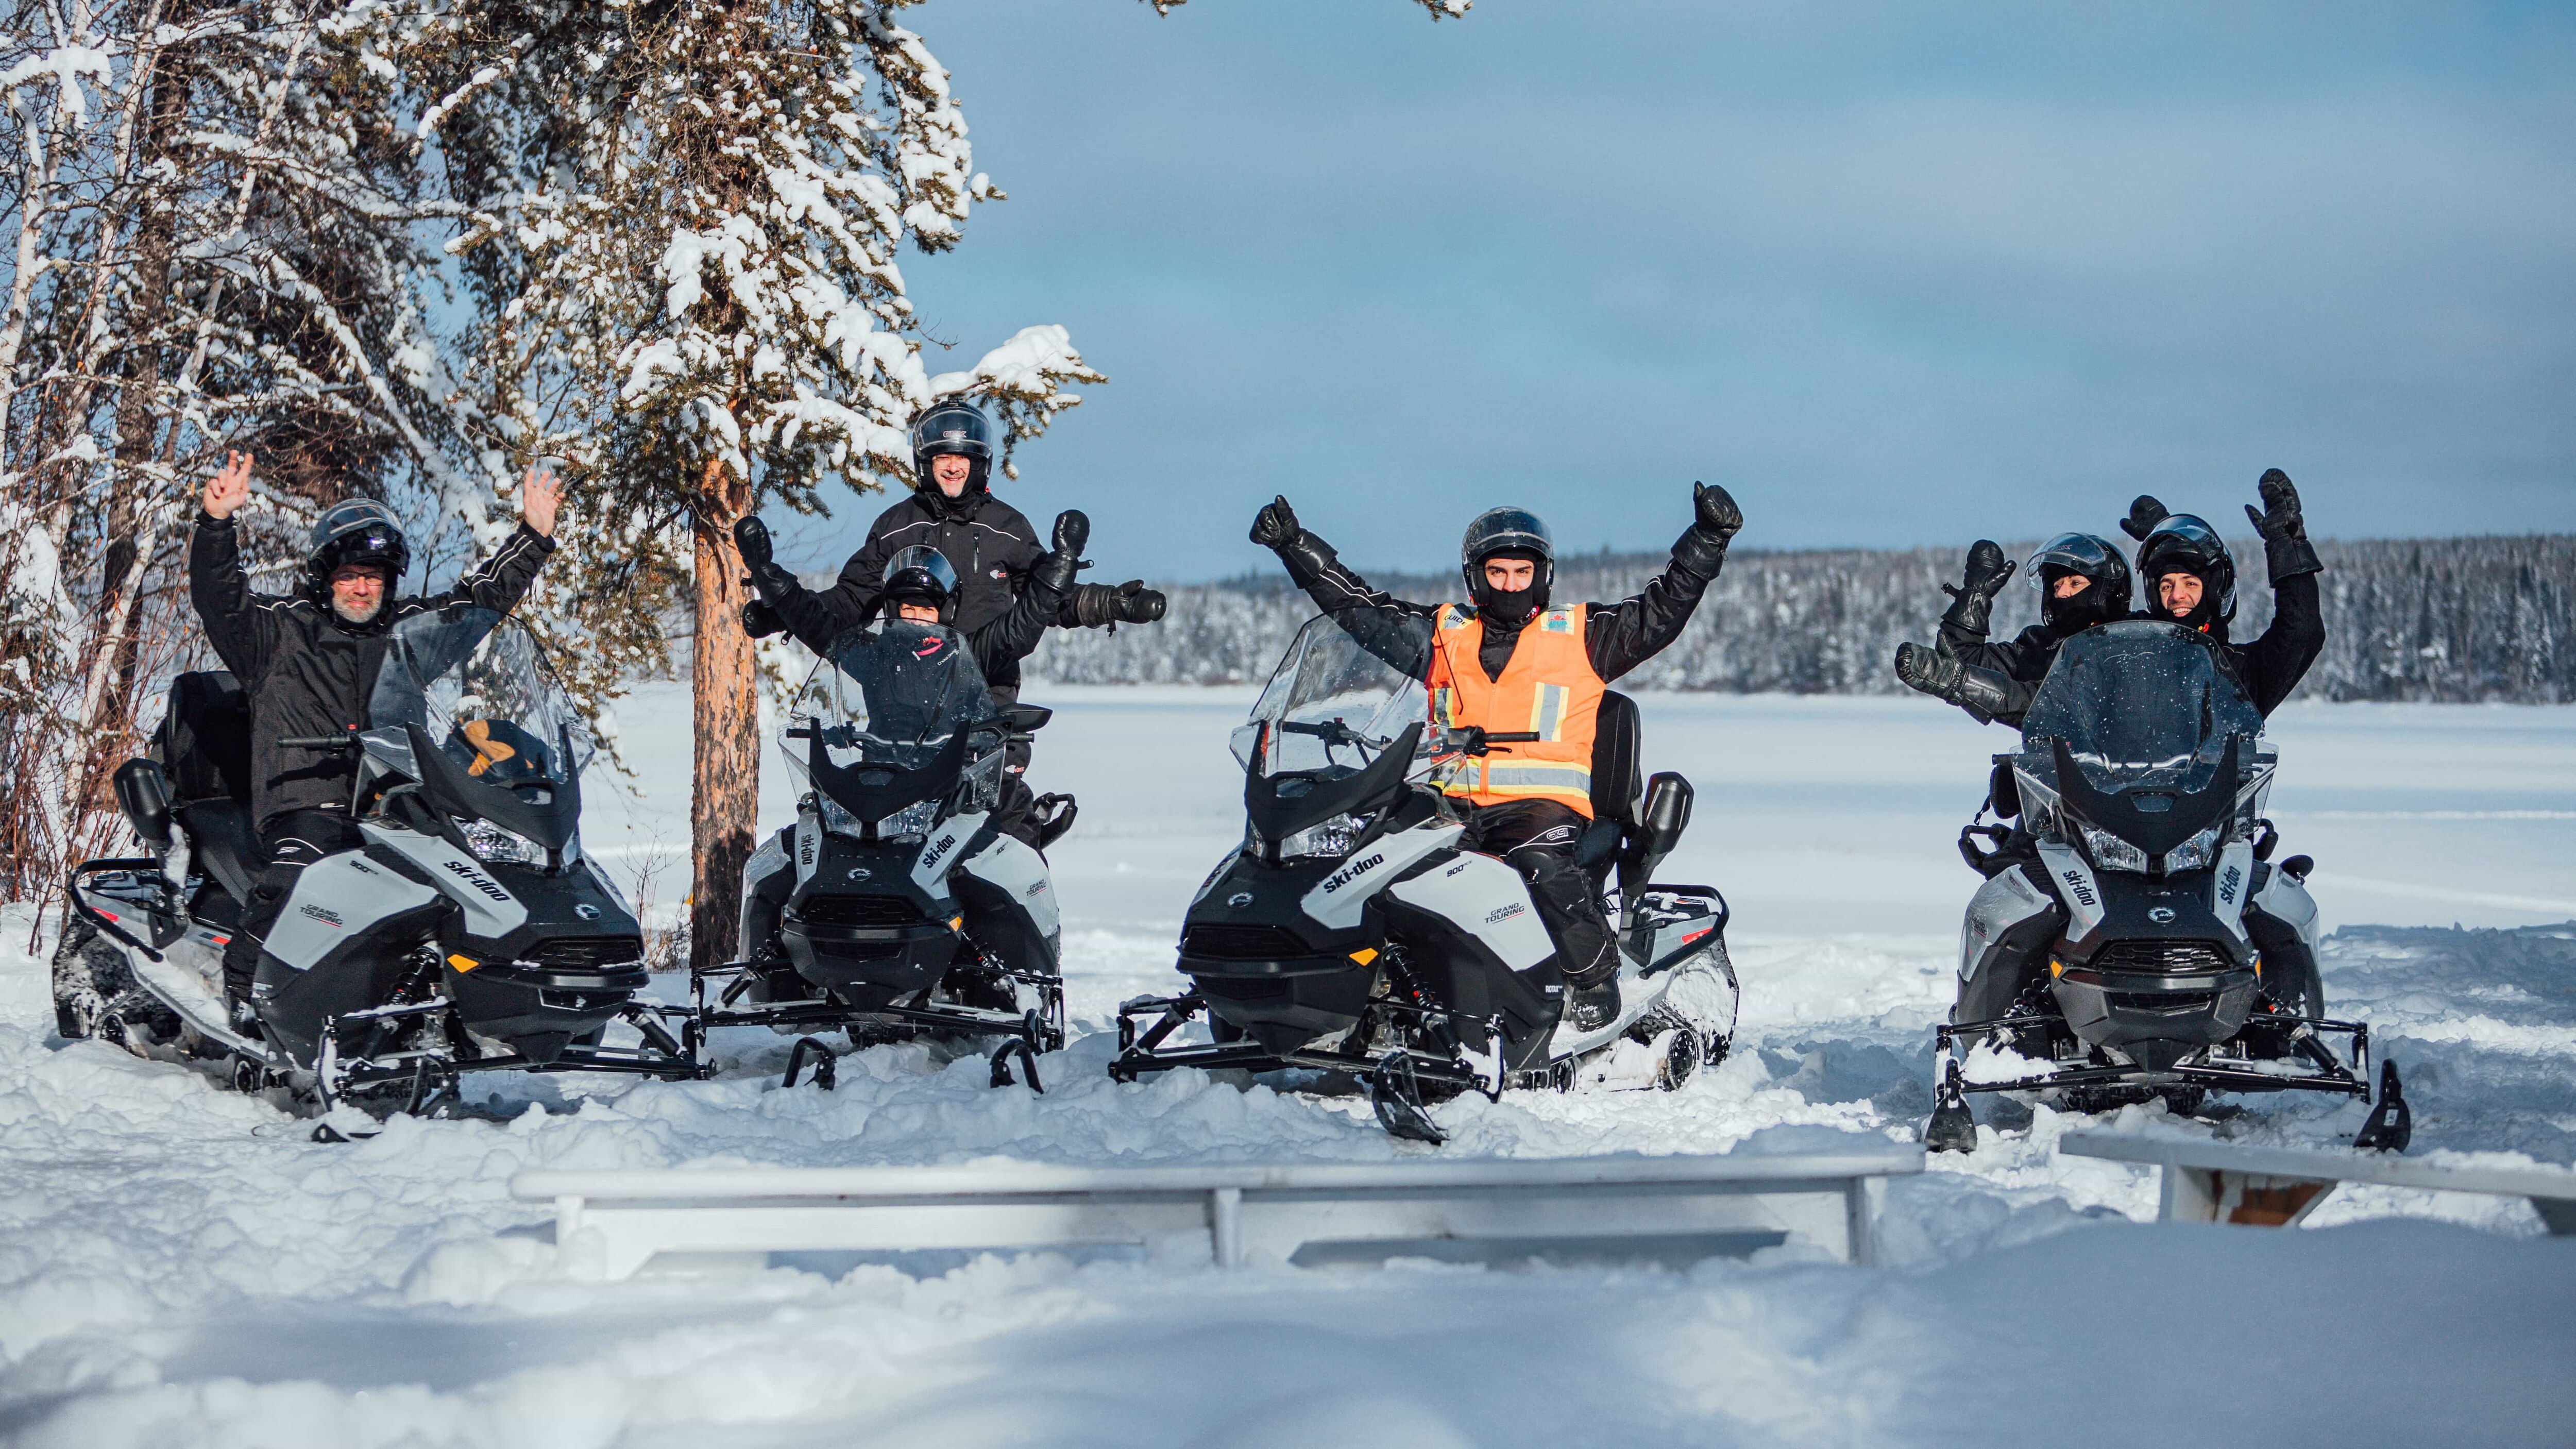 A group of happy riders on their Ski-Doo